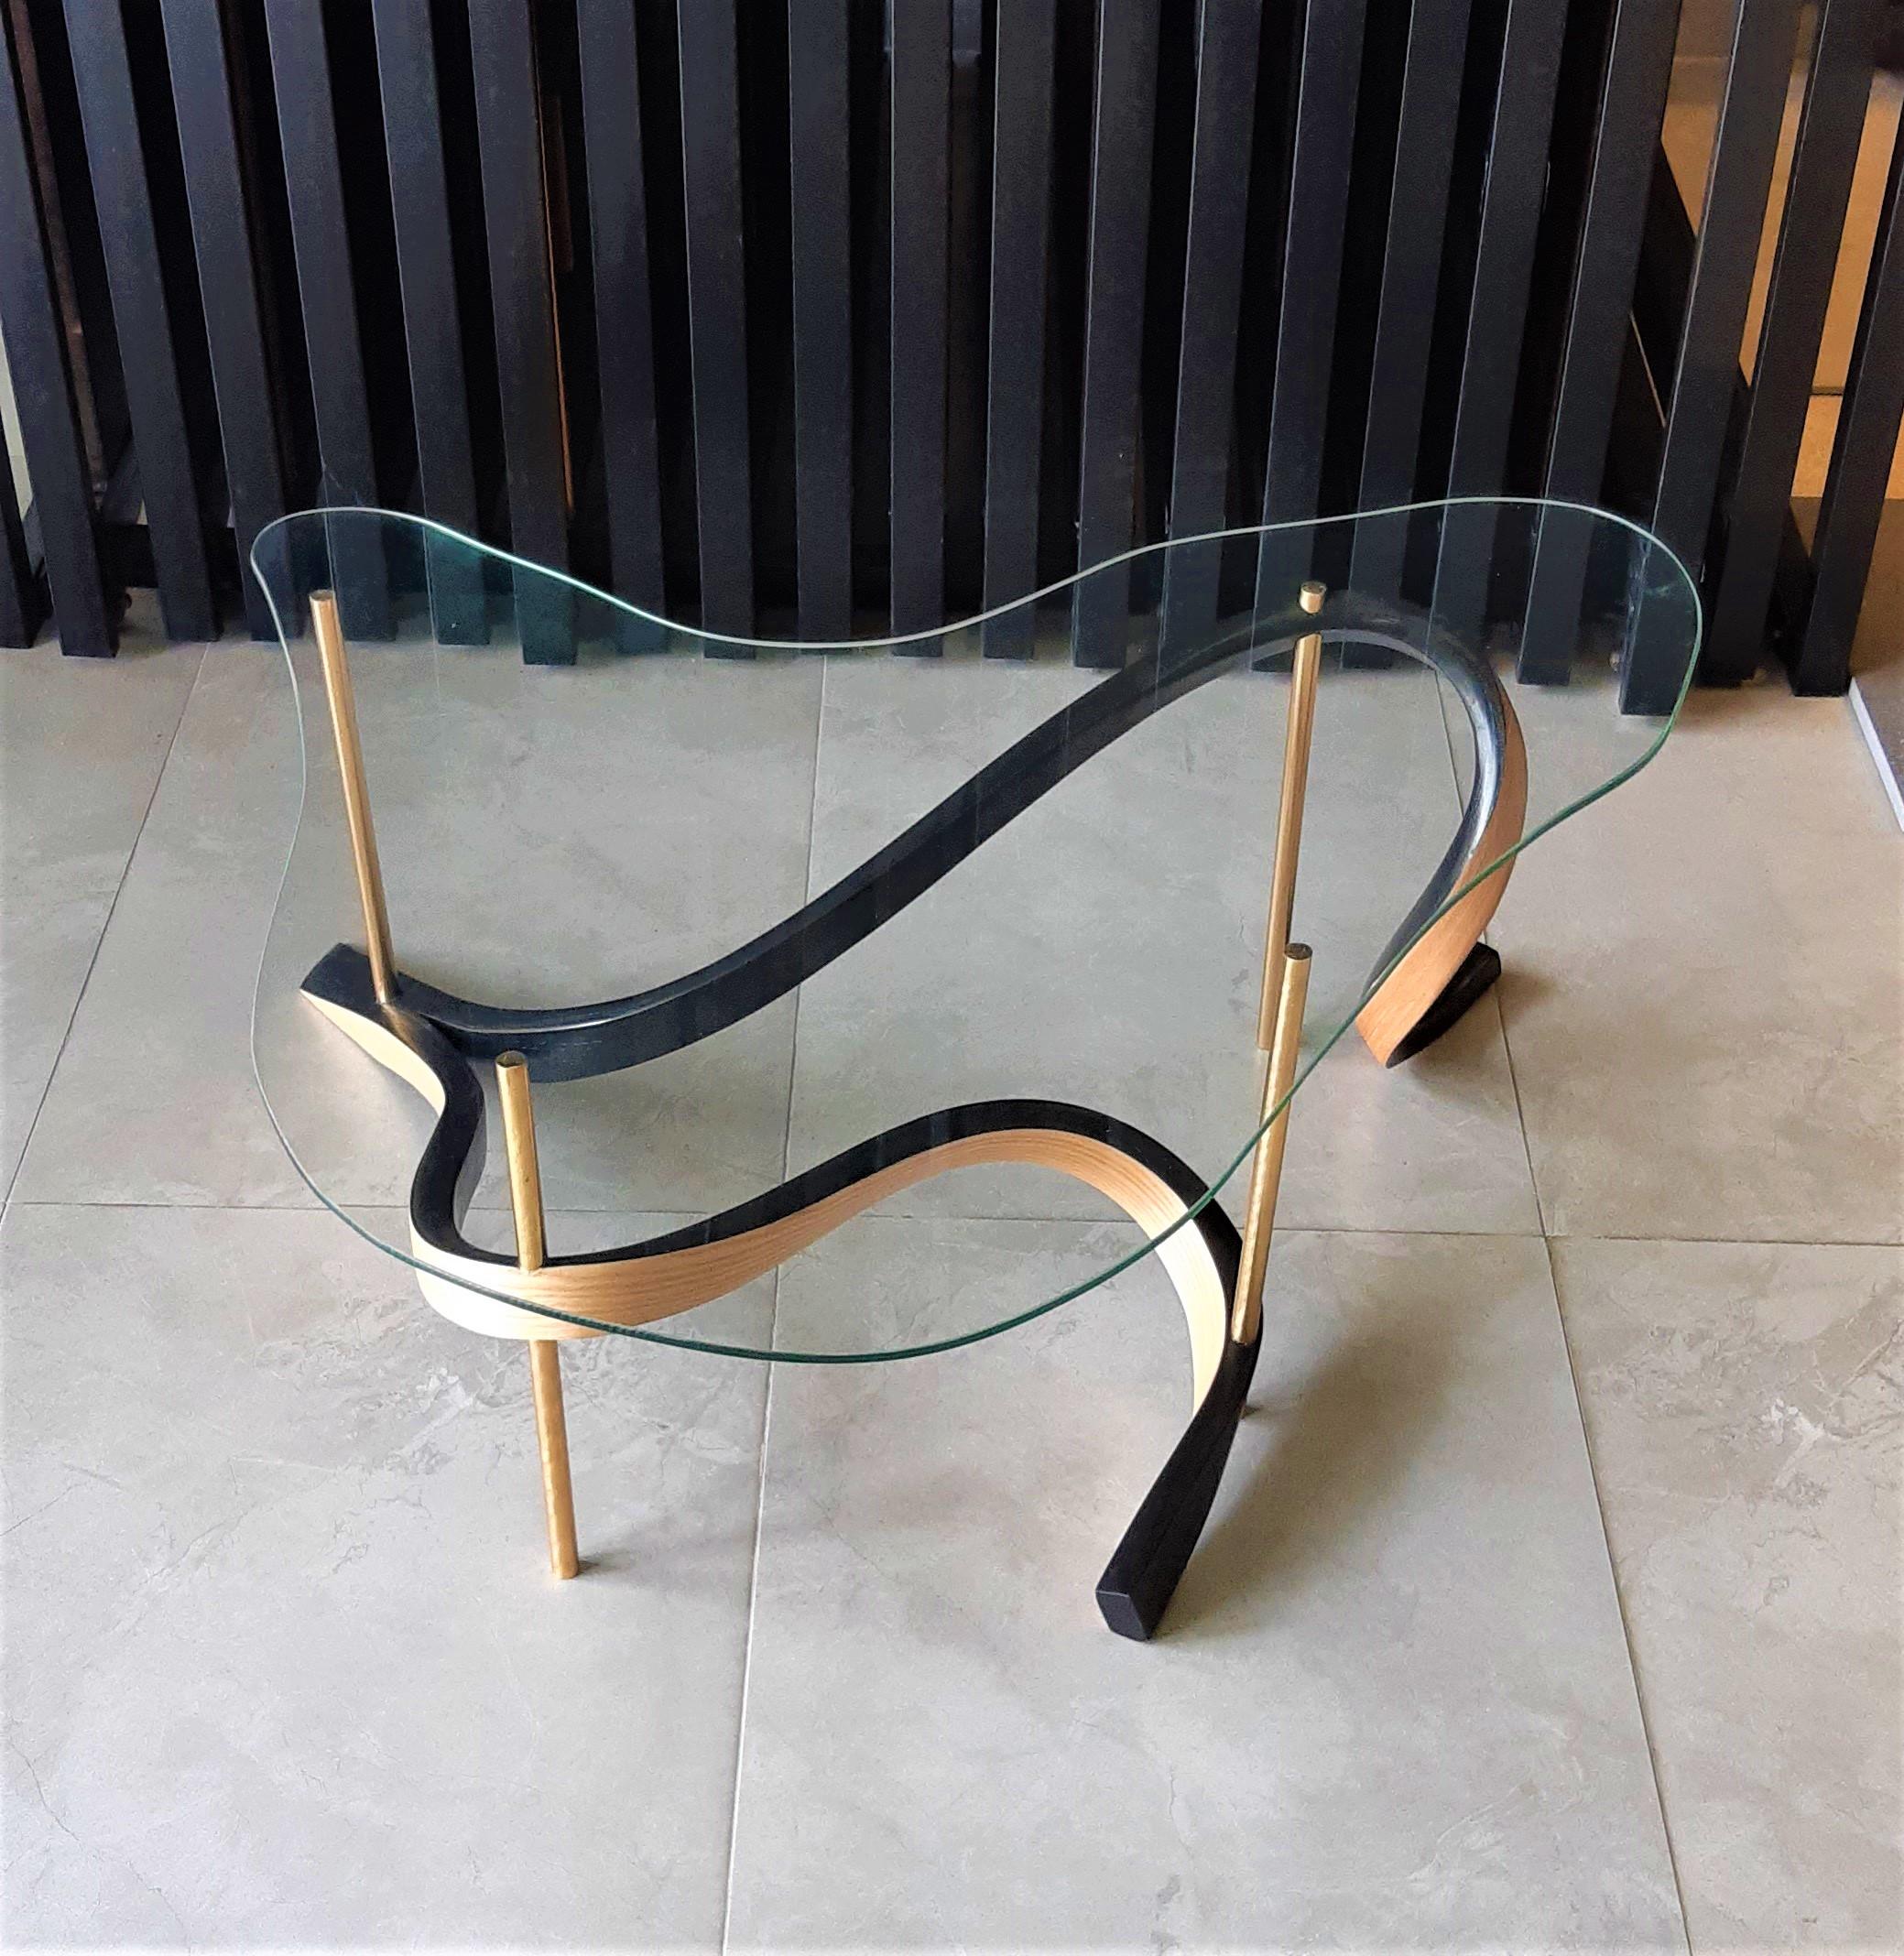 Pakistani Table B4 - Vrksa Series by Raka Studio in Black and Natural Bentwood with Brass For Sale